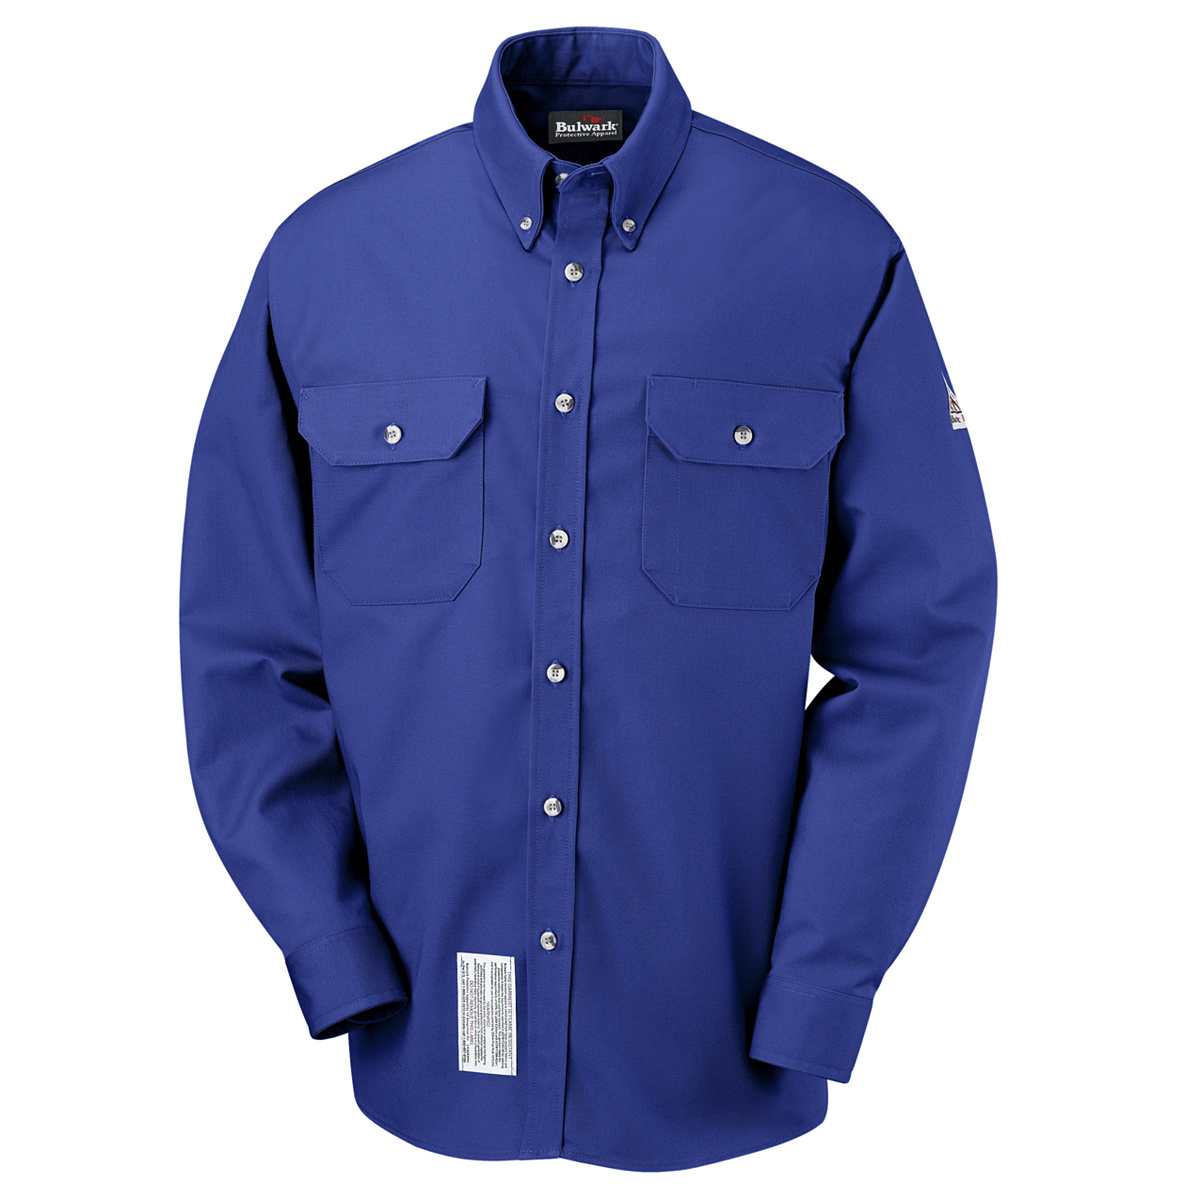 Bulwark® Large Tall Royal Blue Westex Ultrasoft®/Cotton/Nylon Flame Resistant Dress Shirt With Button Front Closure